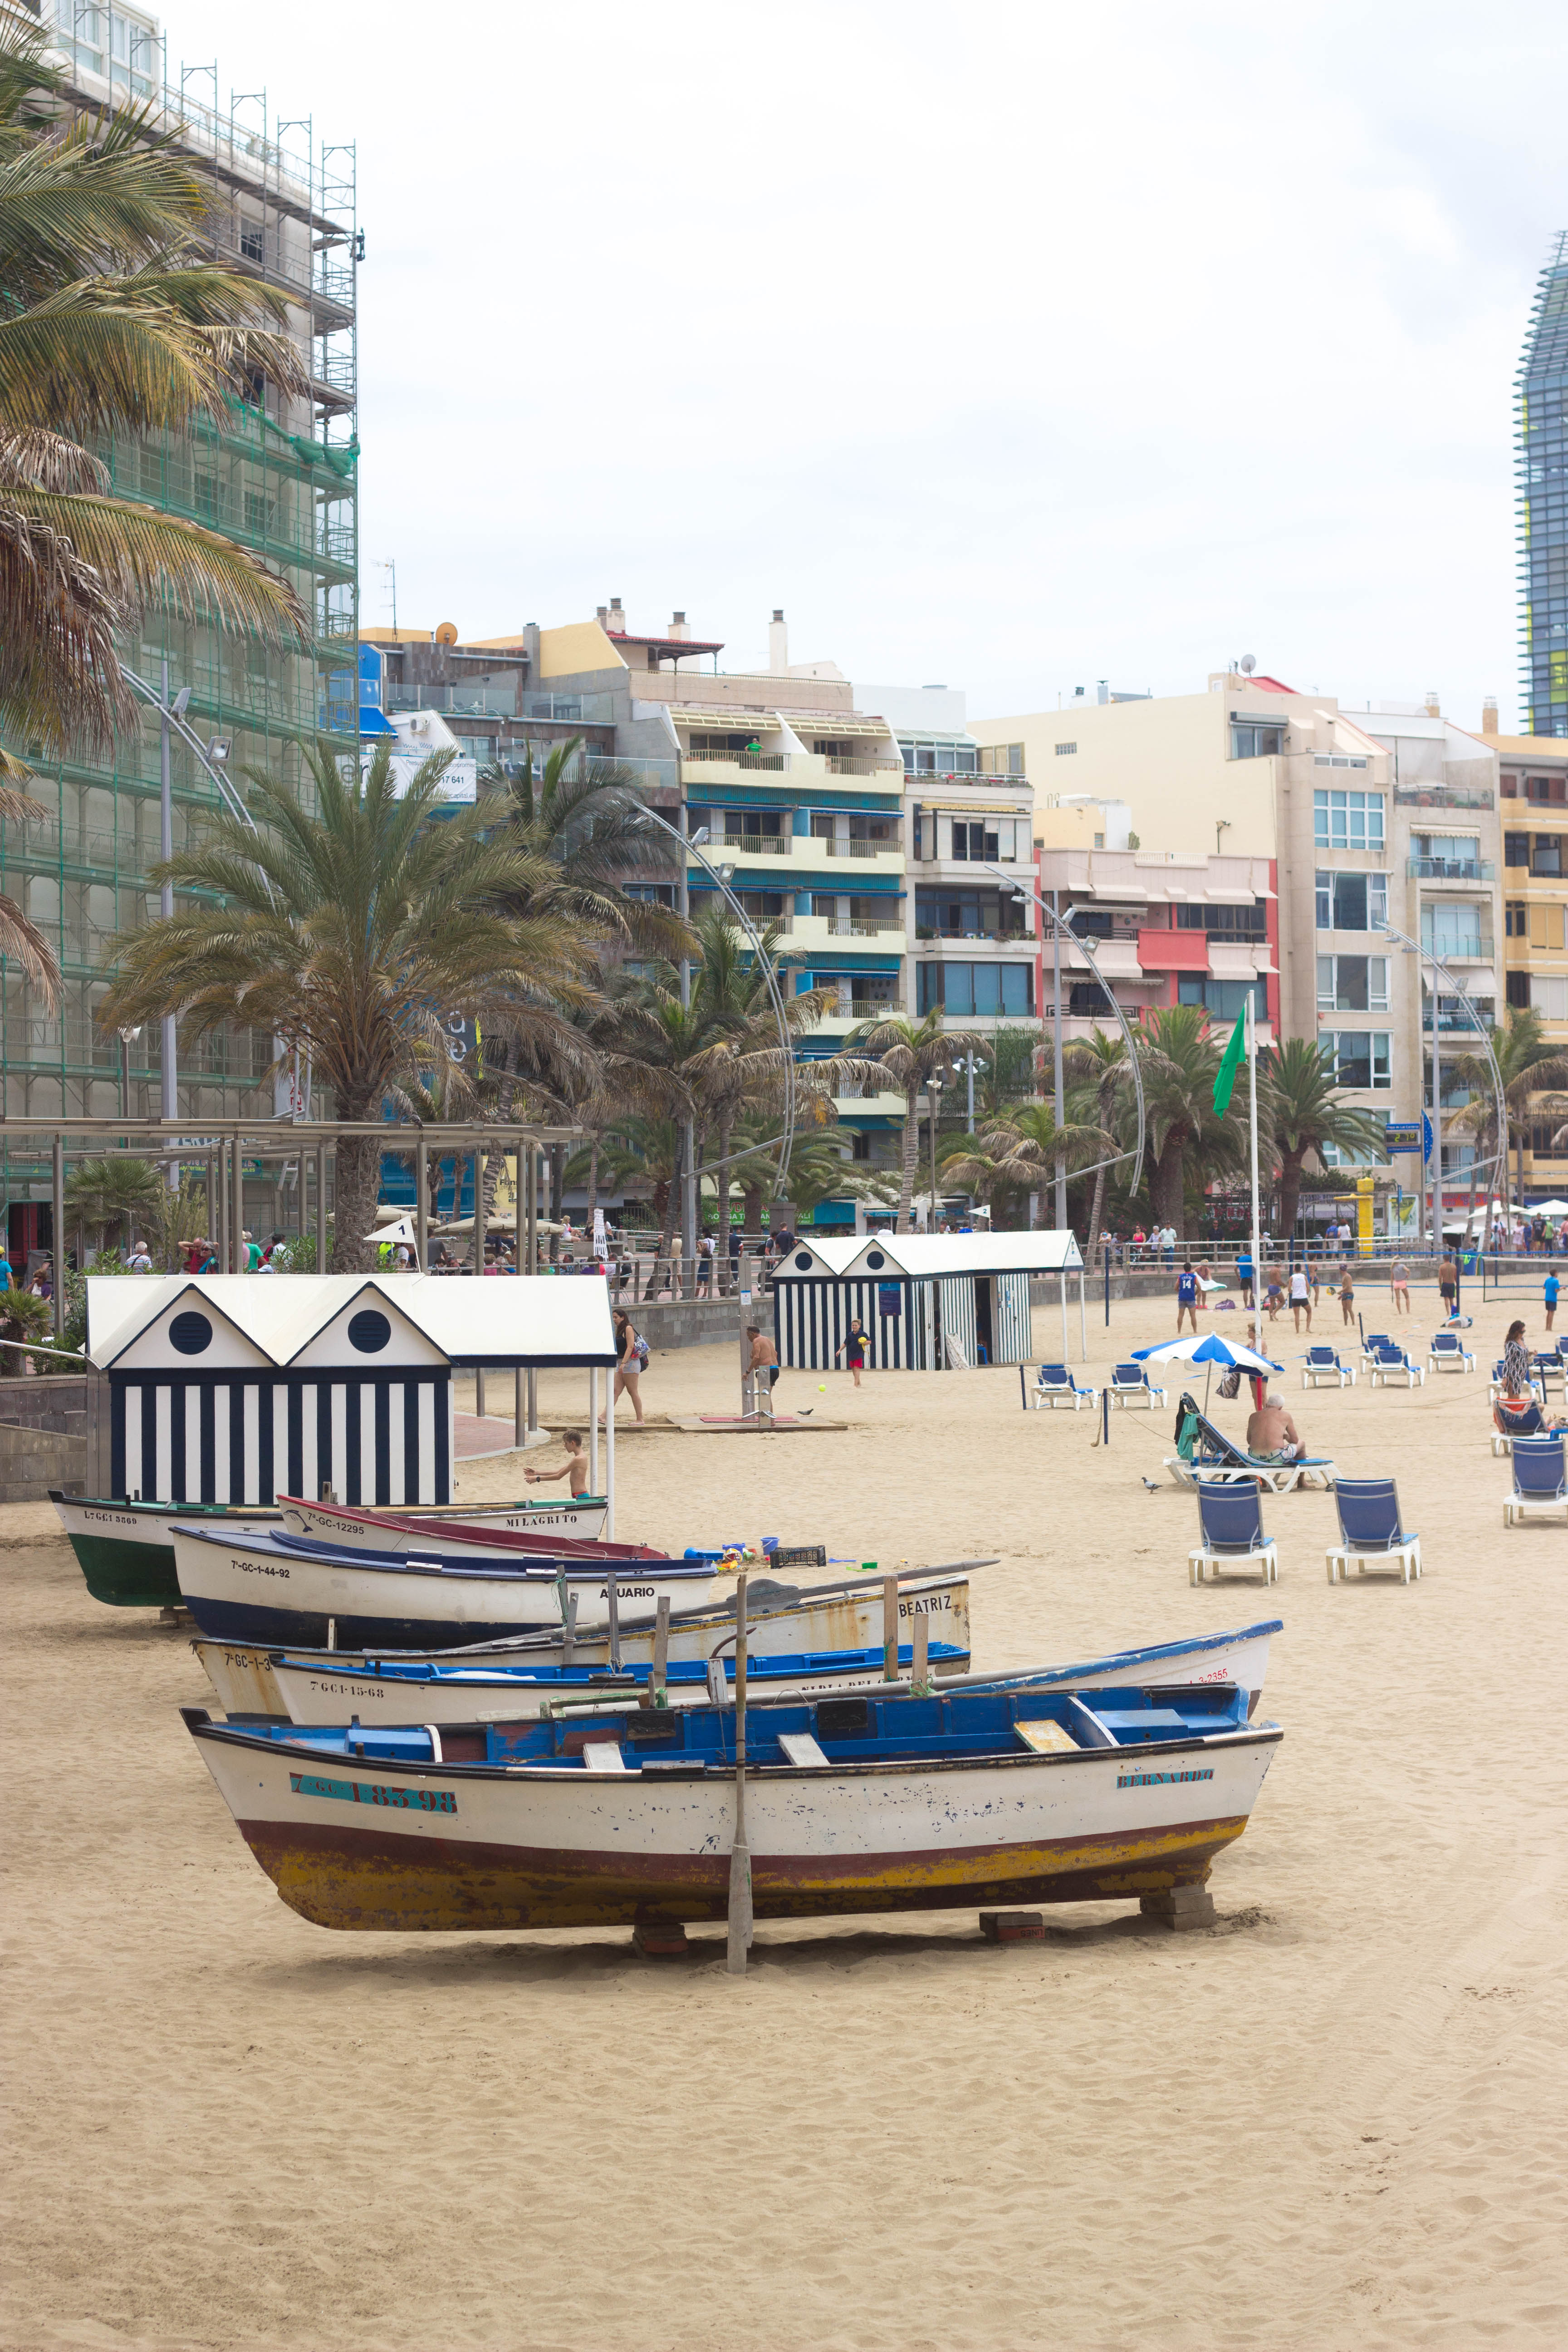 Las Canteras beach is one of the main reasons why I love the city of Las Palmas. This urban beach is always buzzing with people looking for sunshine, sea, beach, and something to eat. It´s a place where you want to be!